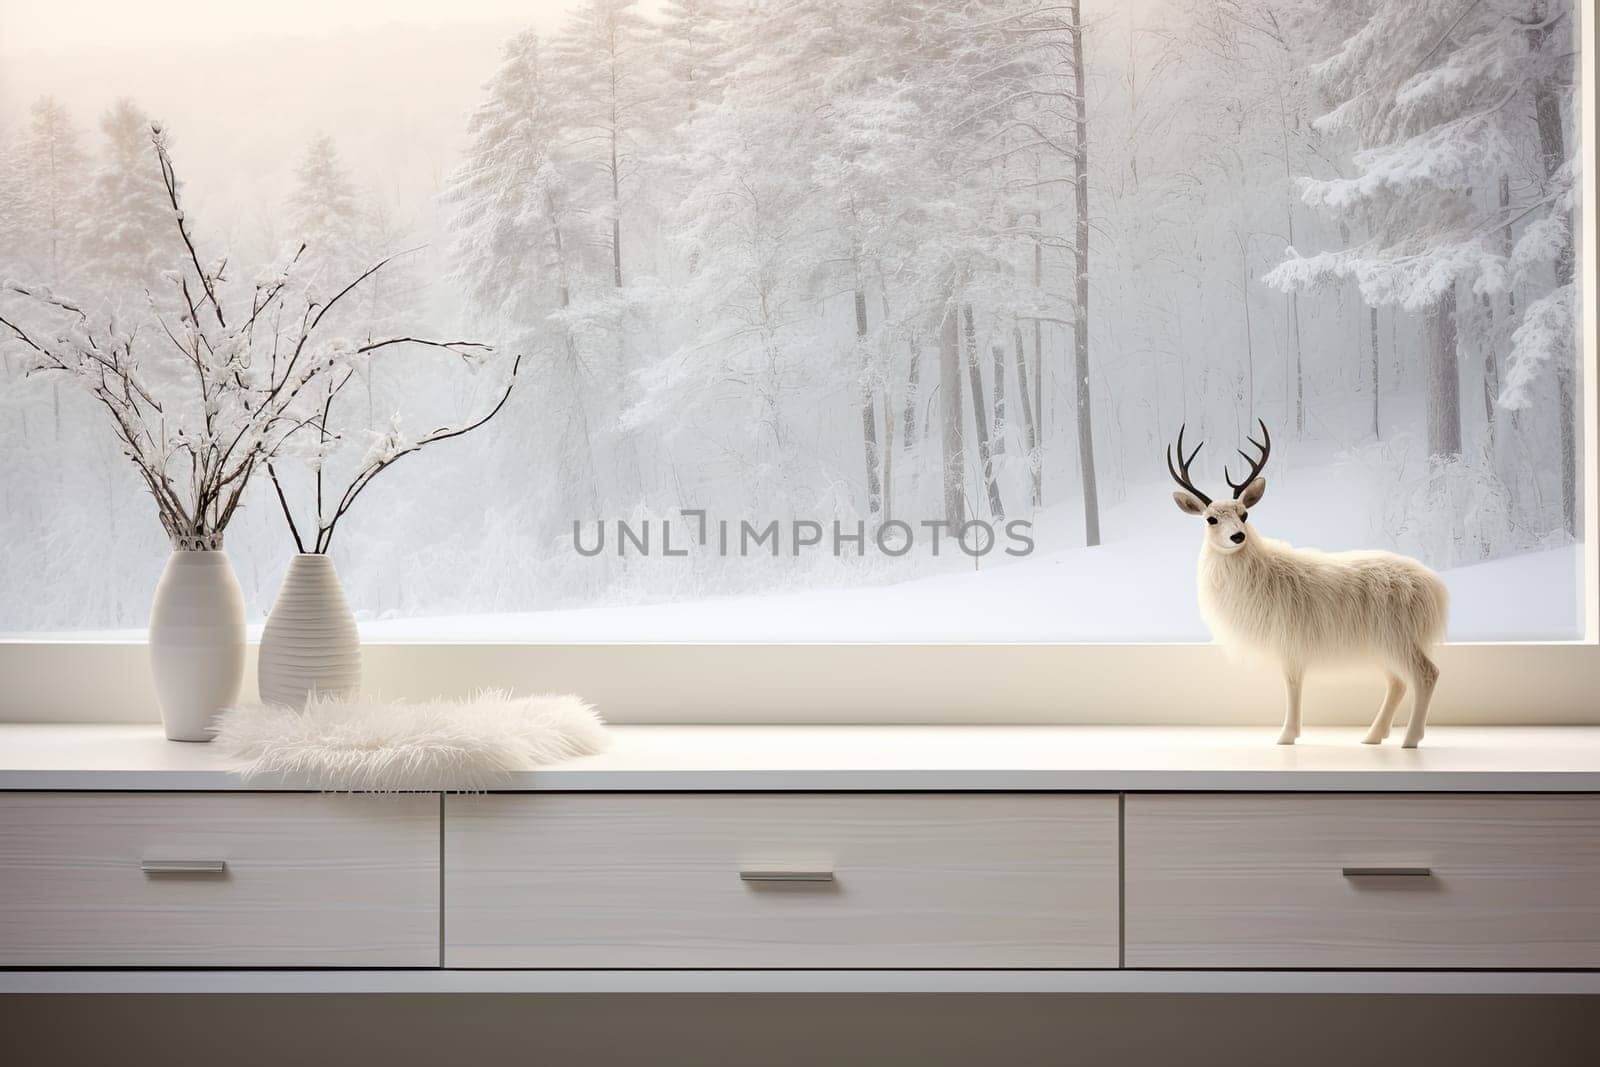 a reindeer is standing on a window sill by golibtolibov